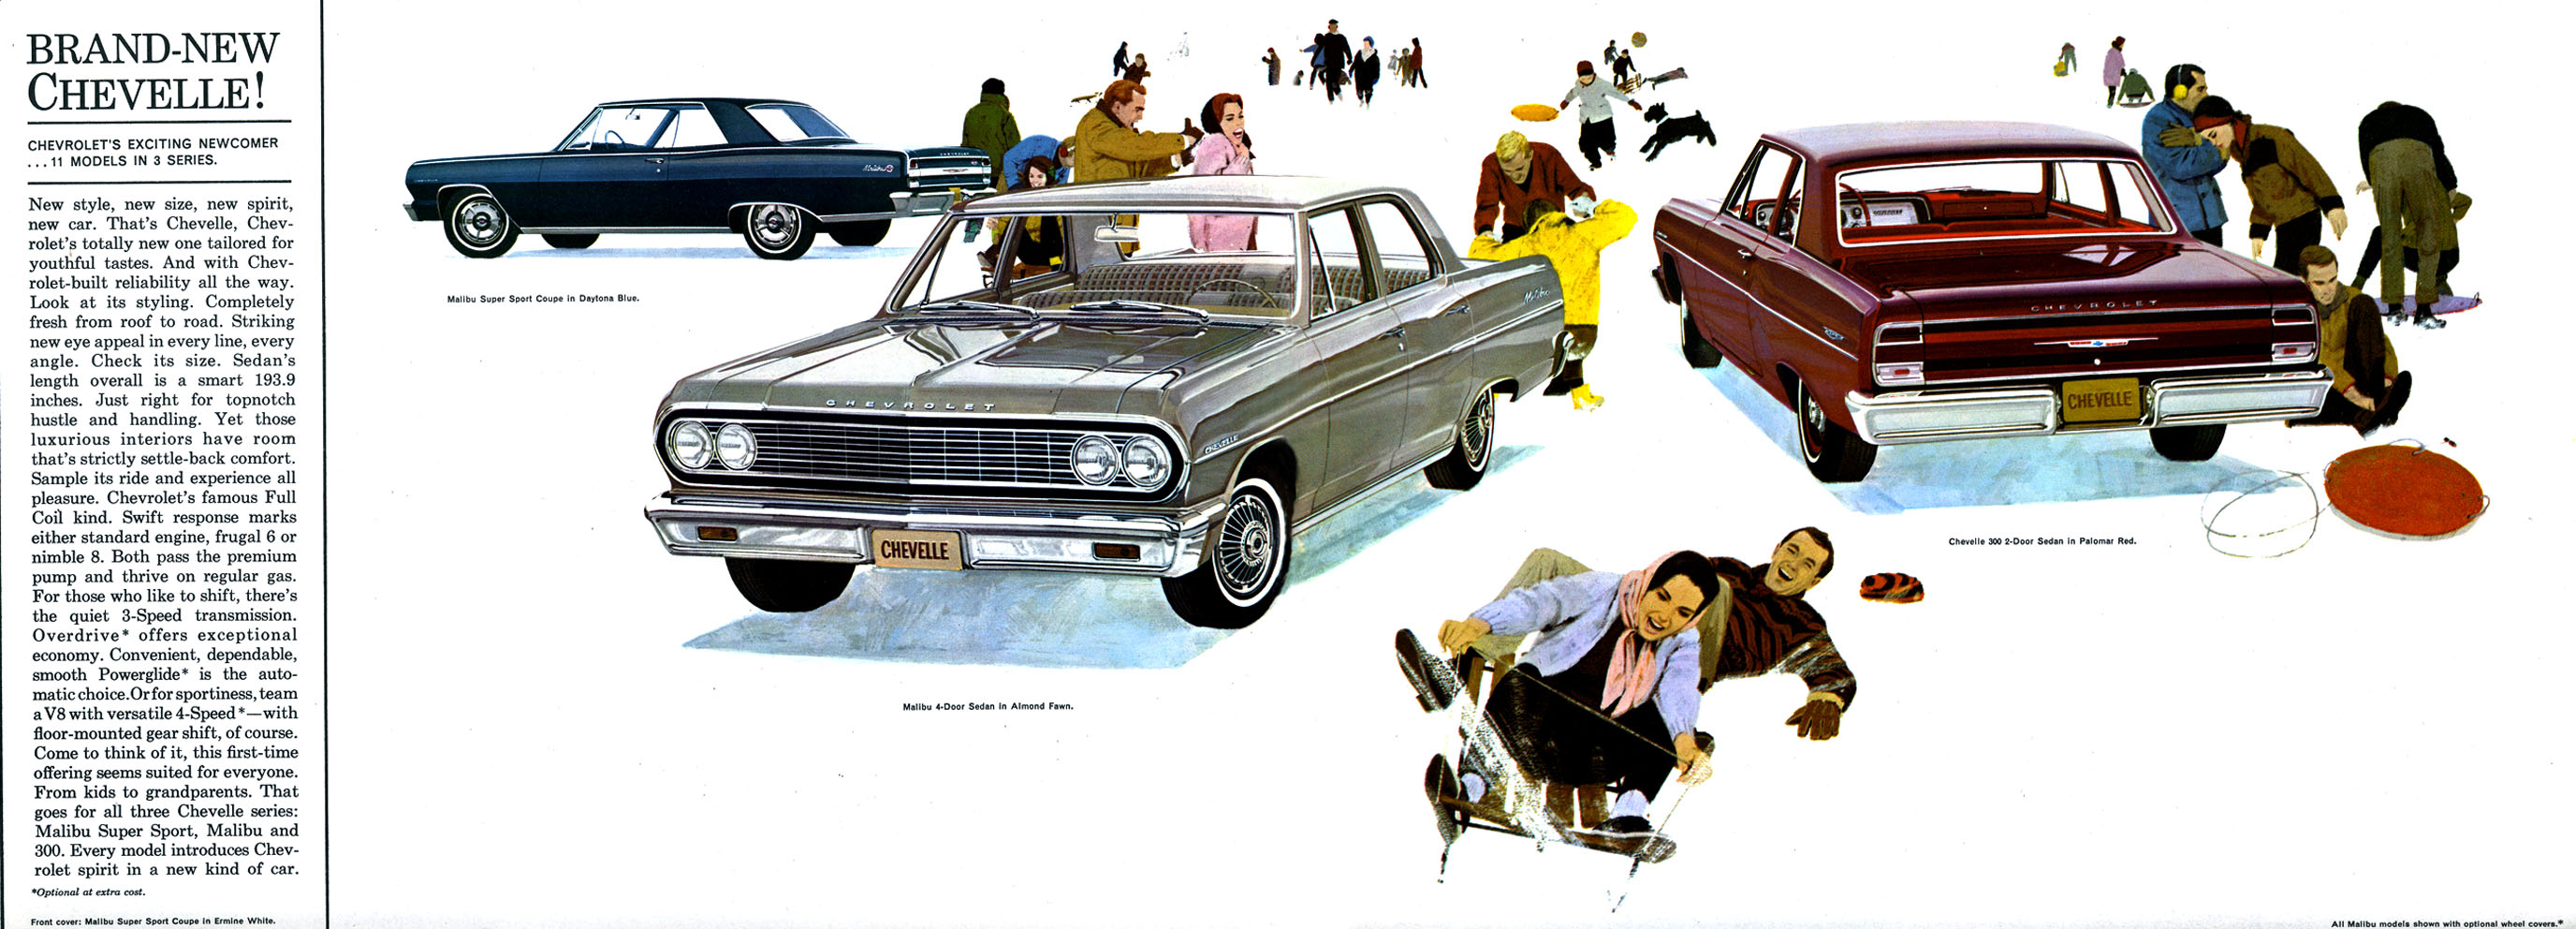 1964 Chevelle OEM Brochure - Page 2